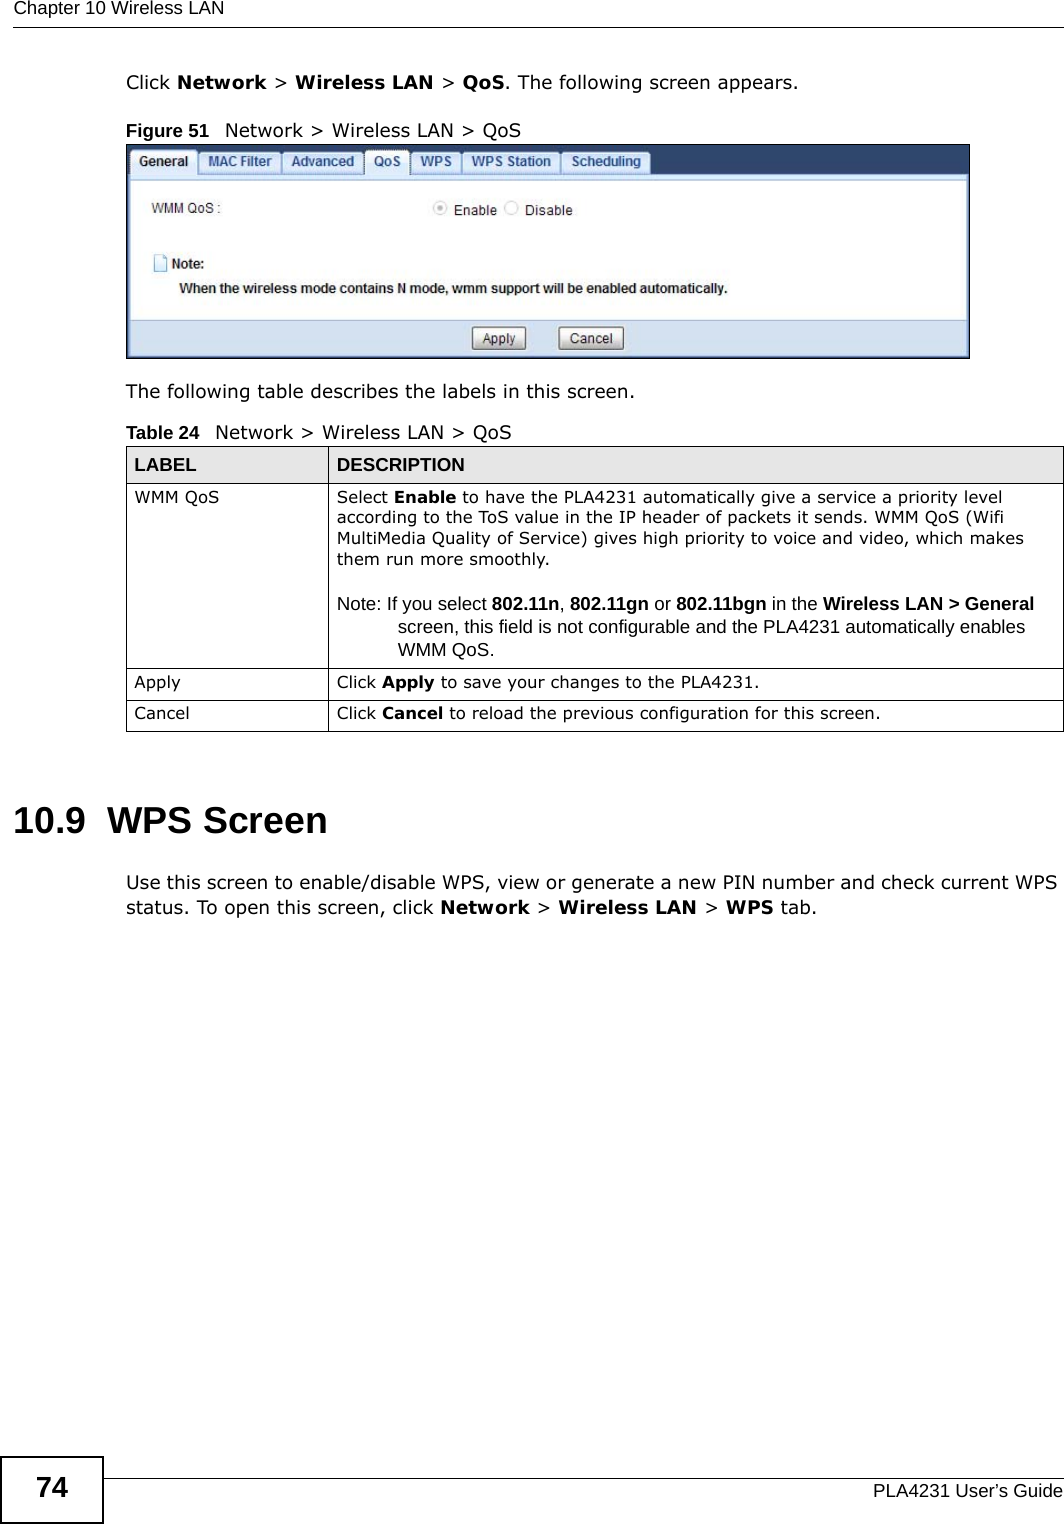 Chapter 10 Wireless LANPLA4231 User’s Guide74Click Network &gt; Wireless LAN &gt; QoS. The following screen appears.Figure 51   Network &gt; Wireless LAN &gt; QoS The following table describes the labels in this screen. 10.9  WPS ScreenUse this screen to enable/disable WPS, view or generate a new PIN number and check current WPS status. To open this screen, click Network &gt; Wireless LAN &gt; WPS tab.Table 24   Network &gt; Wireless LAN &gt; QoSLABEL DESCRIPTIONWMM QoS Select Enable to have the PLA4231 automatically give a service a priority level according to the ToS value in the IP header of packets it sends. WMM QoS (Wifi MultiMedia Quality of Service) gives high priority to voice and video, which makes them run more smoothly.Note: If you select 802.11n, 802.11gn or 802.11bgn in the Wireless LAN &gt; General screen, this field is not configurable and the PLA4231 automatically enables WMM QoS.Apply Click Apply to save your changes to the PLA4231.Cancel Click Cancel to reload the previous configuration for this screen.